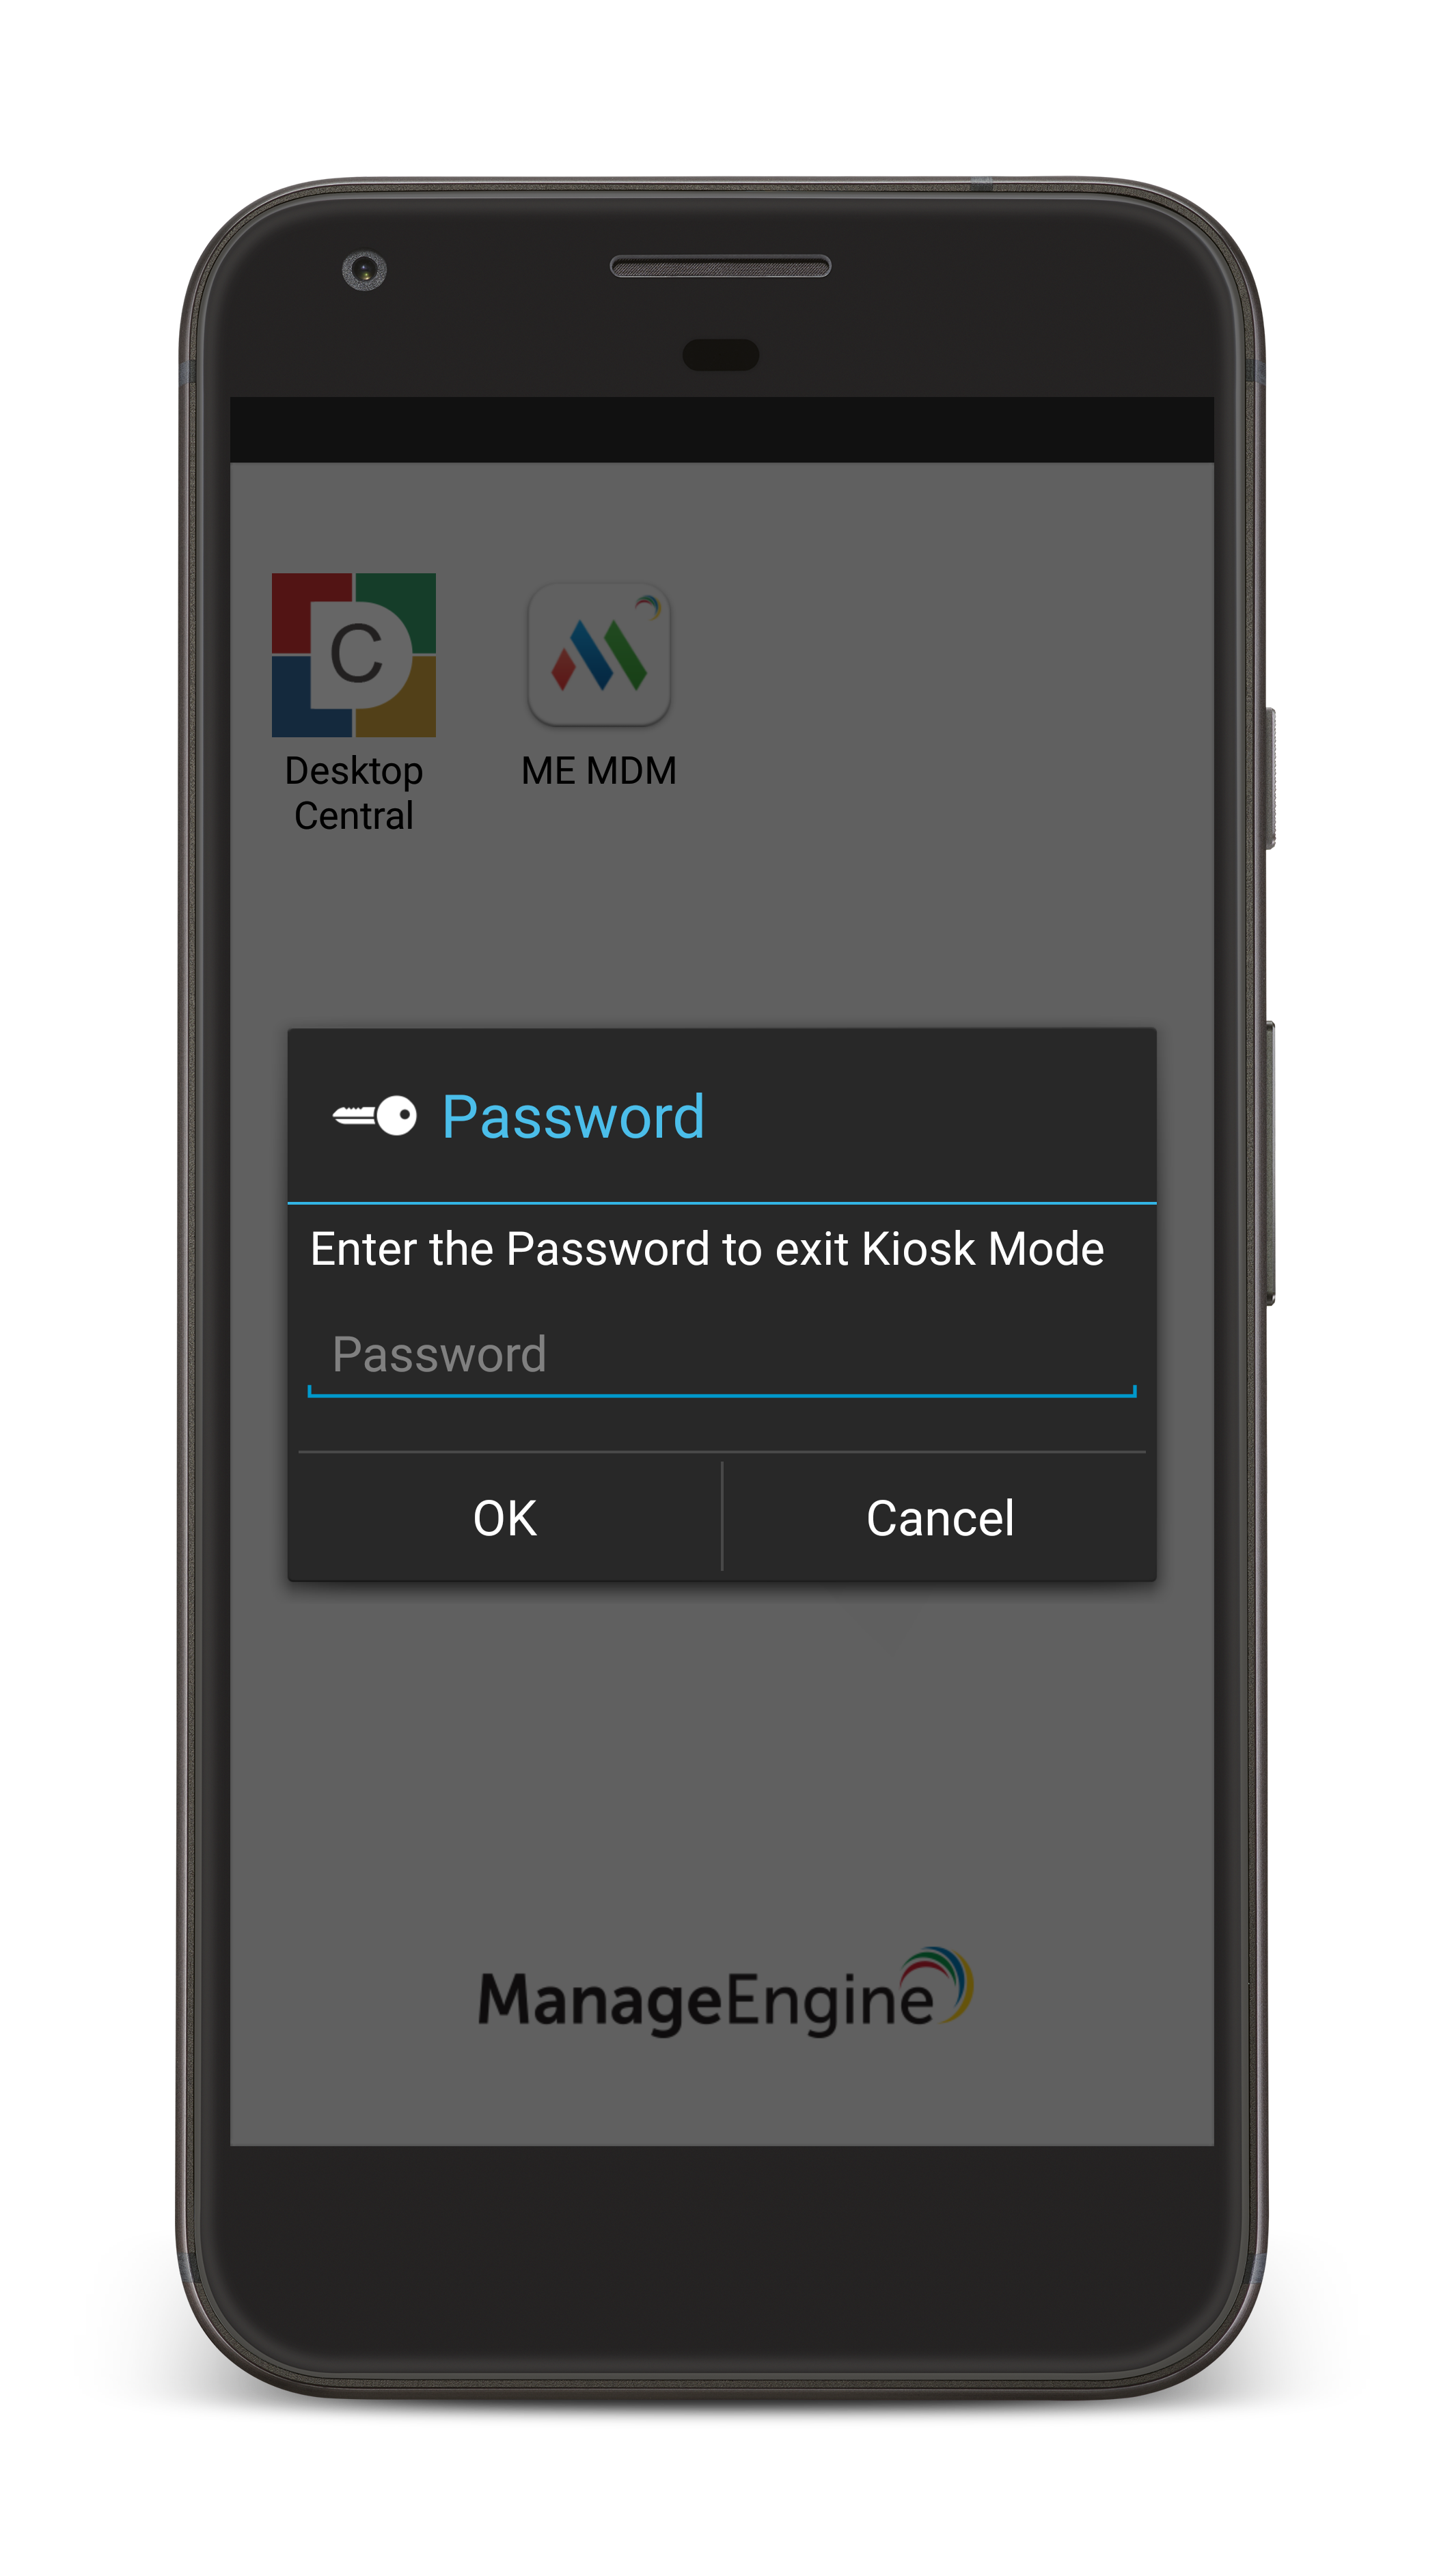 Using password to pause or temporarily exit out of MDM Kiosk mode on Android